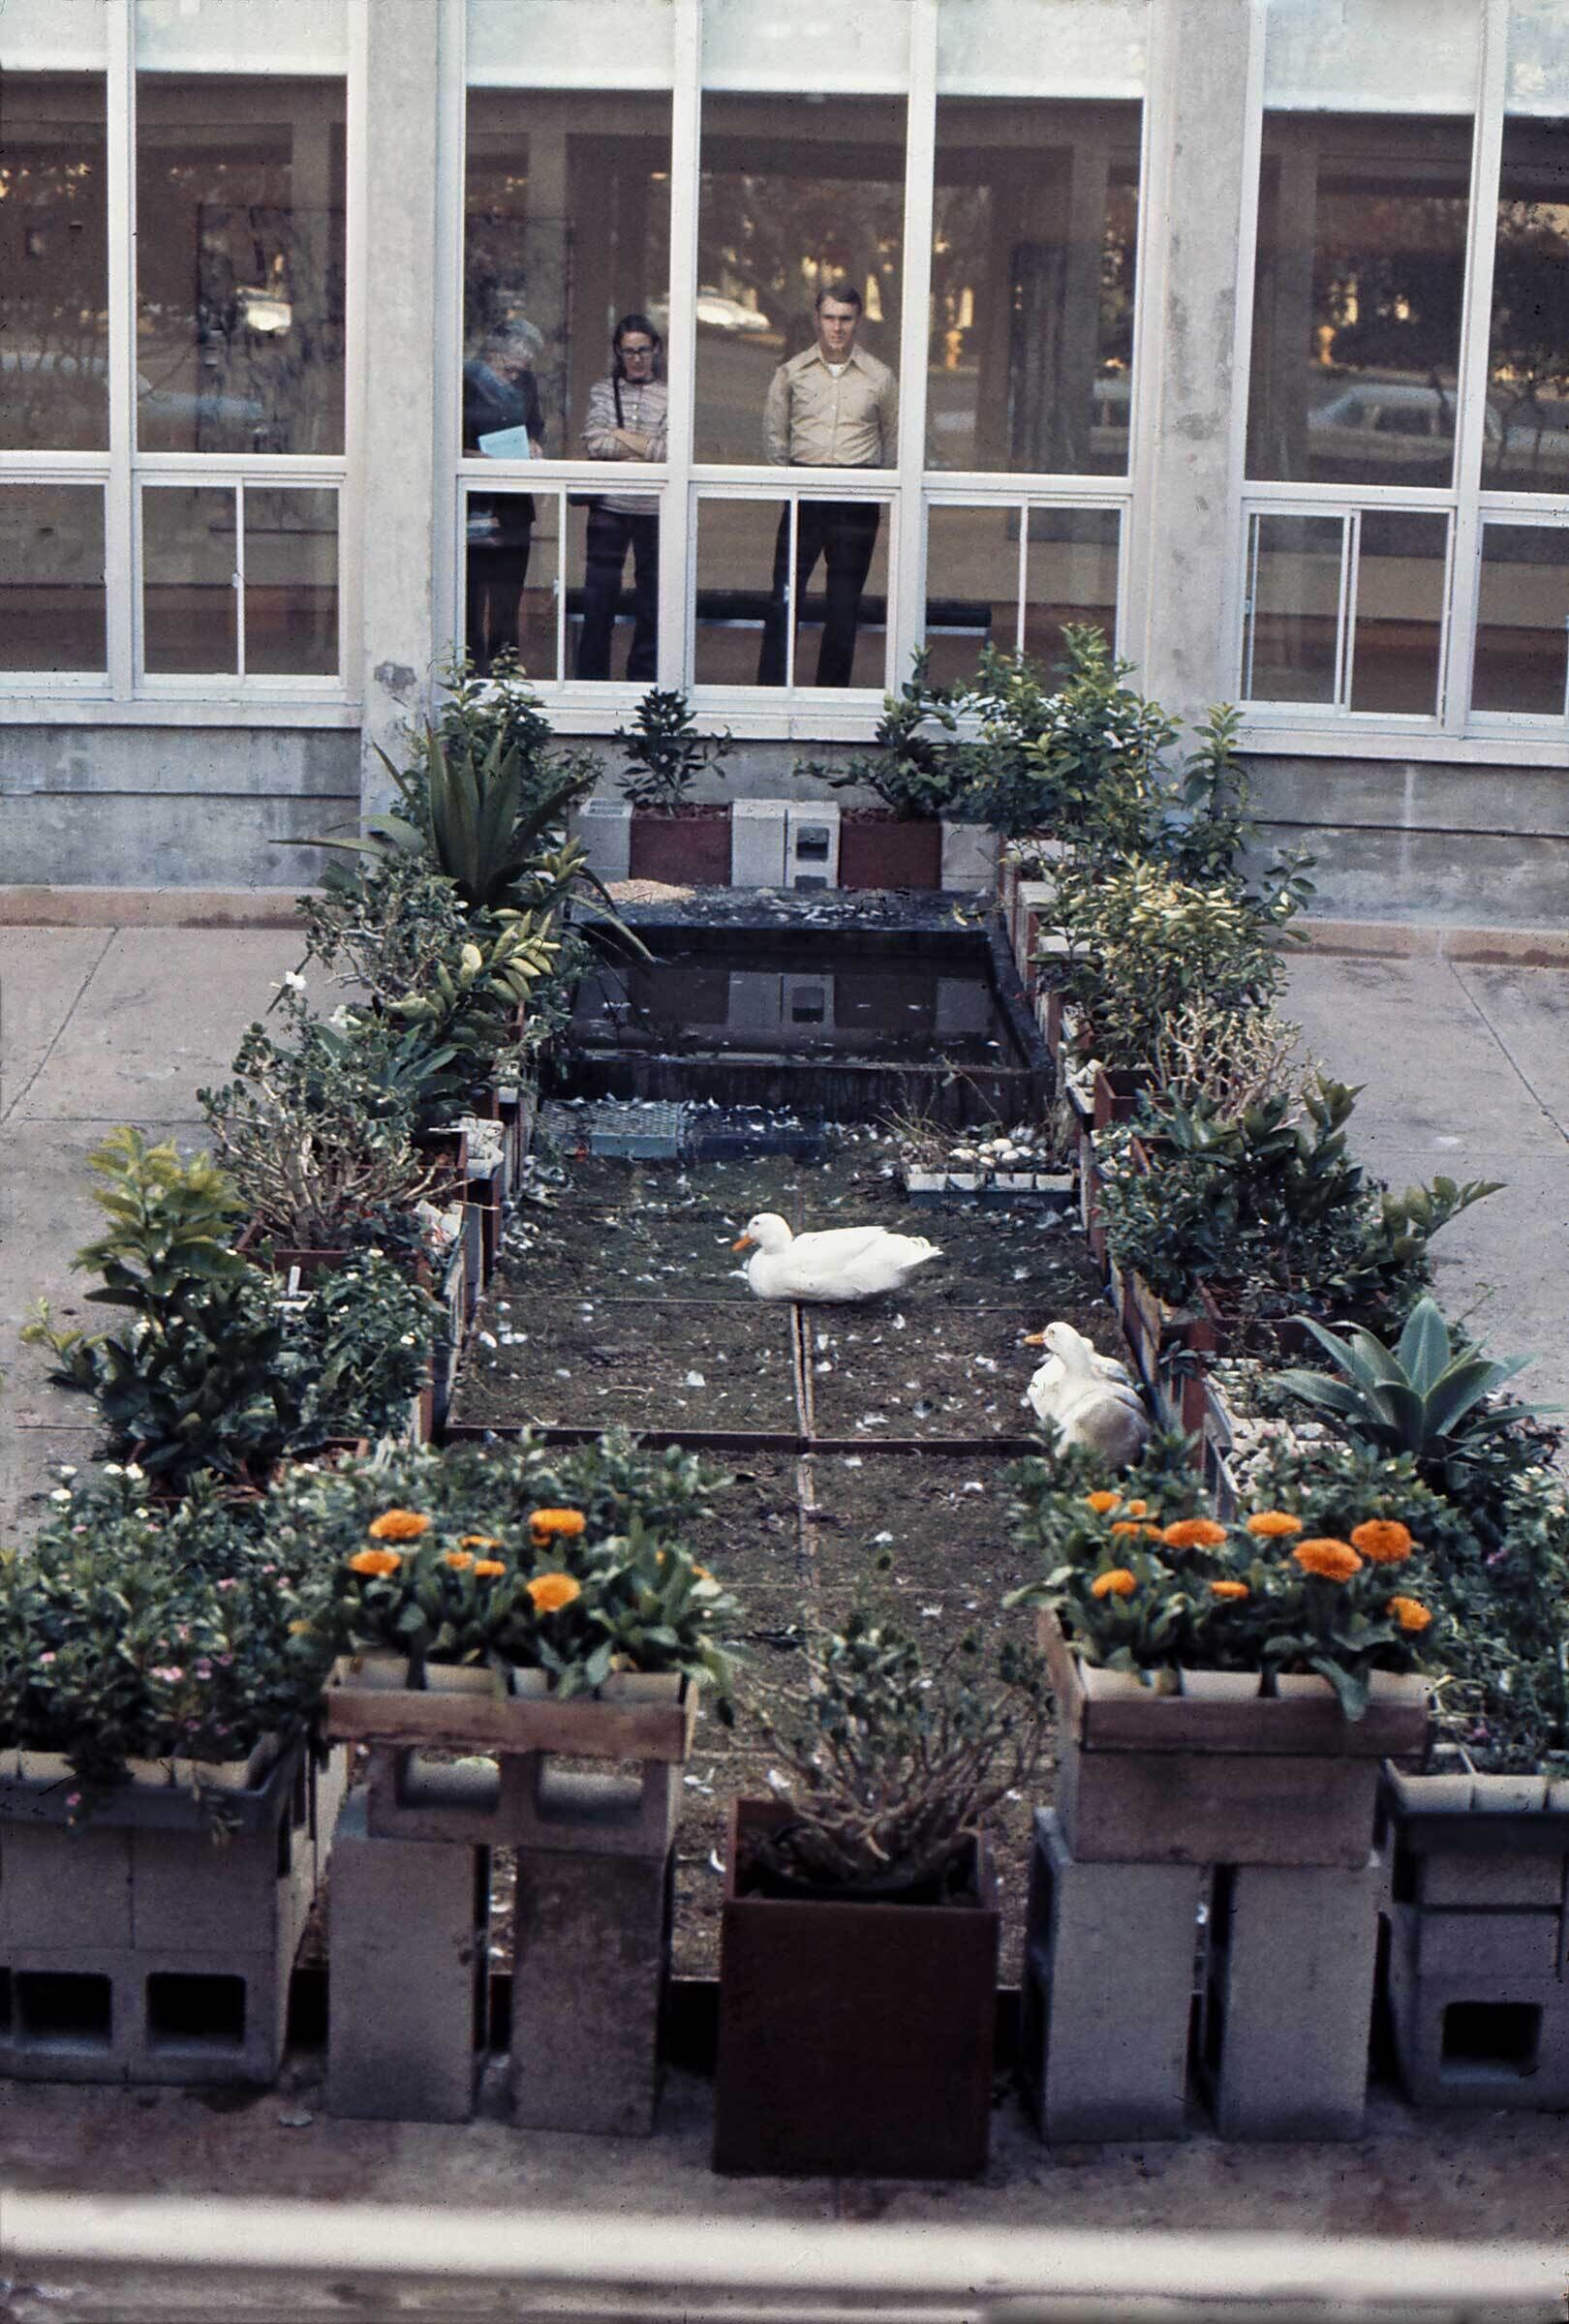 A small garden with a pond and ducks, surrounded by potted plants and flowers. Three people are looking through the windows in the background.